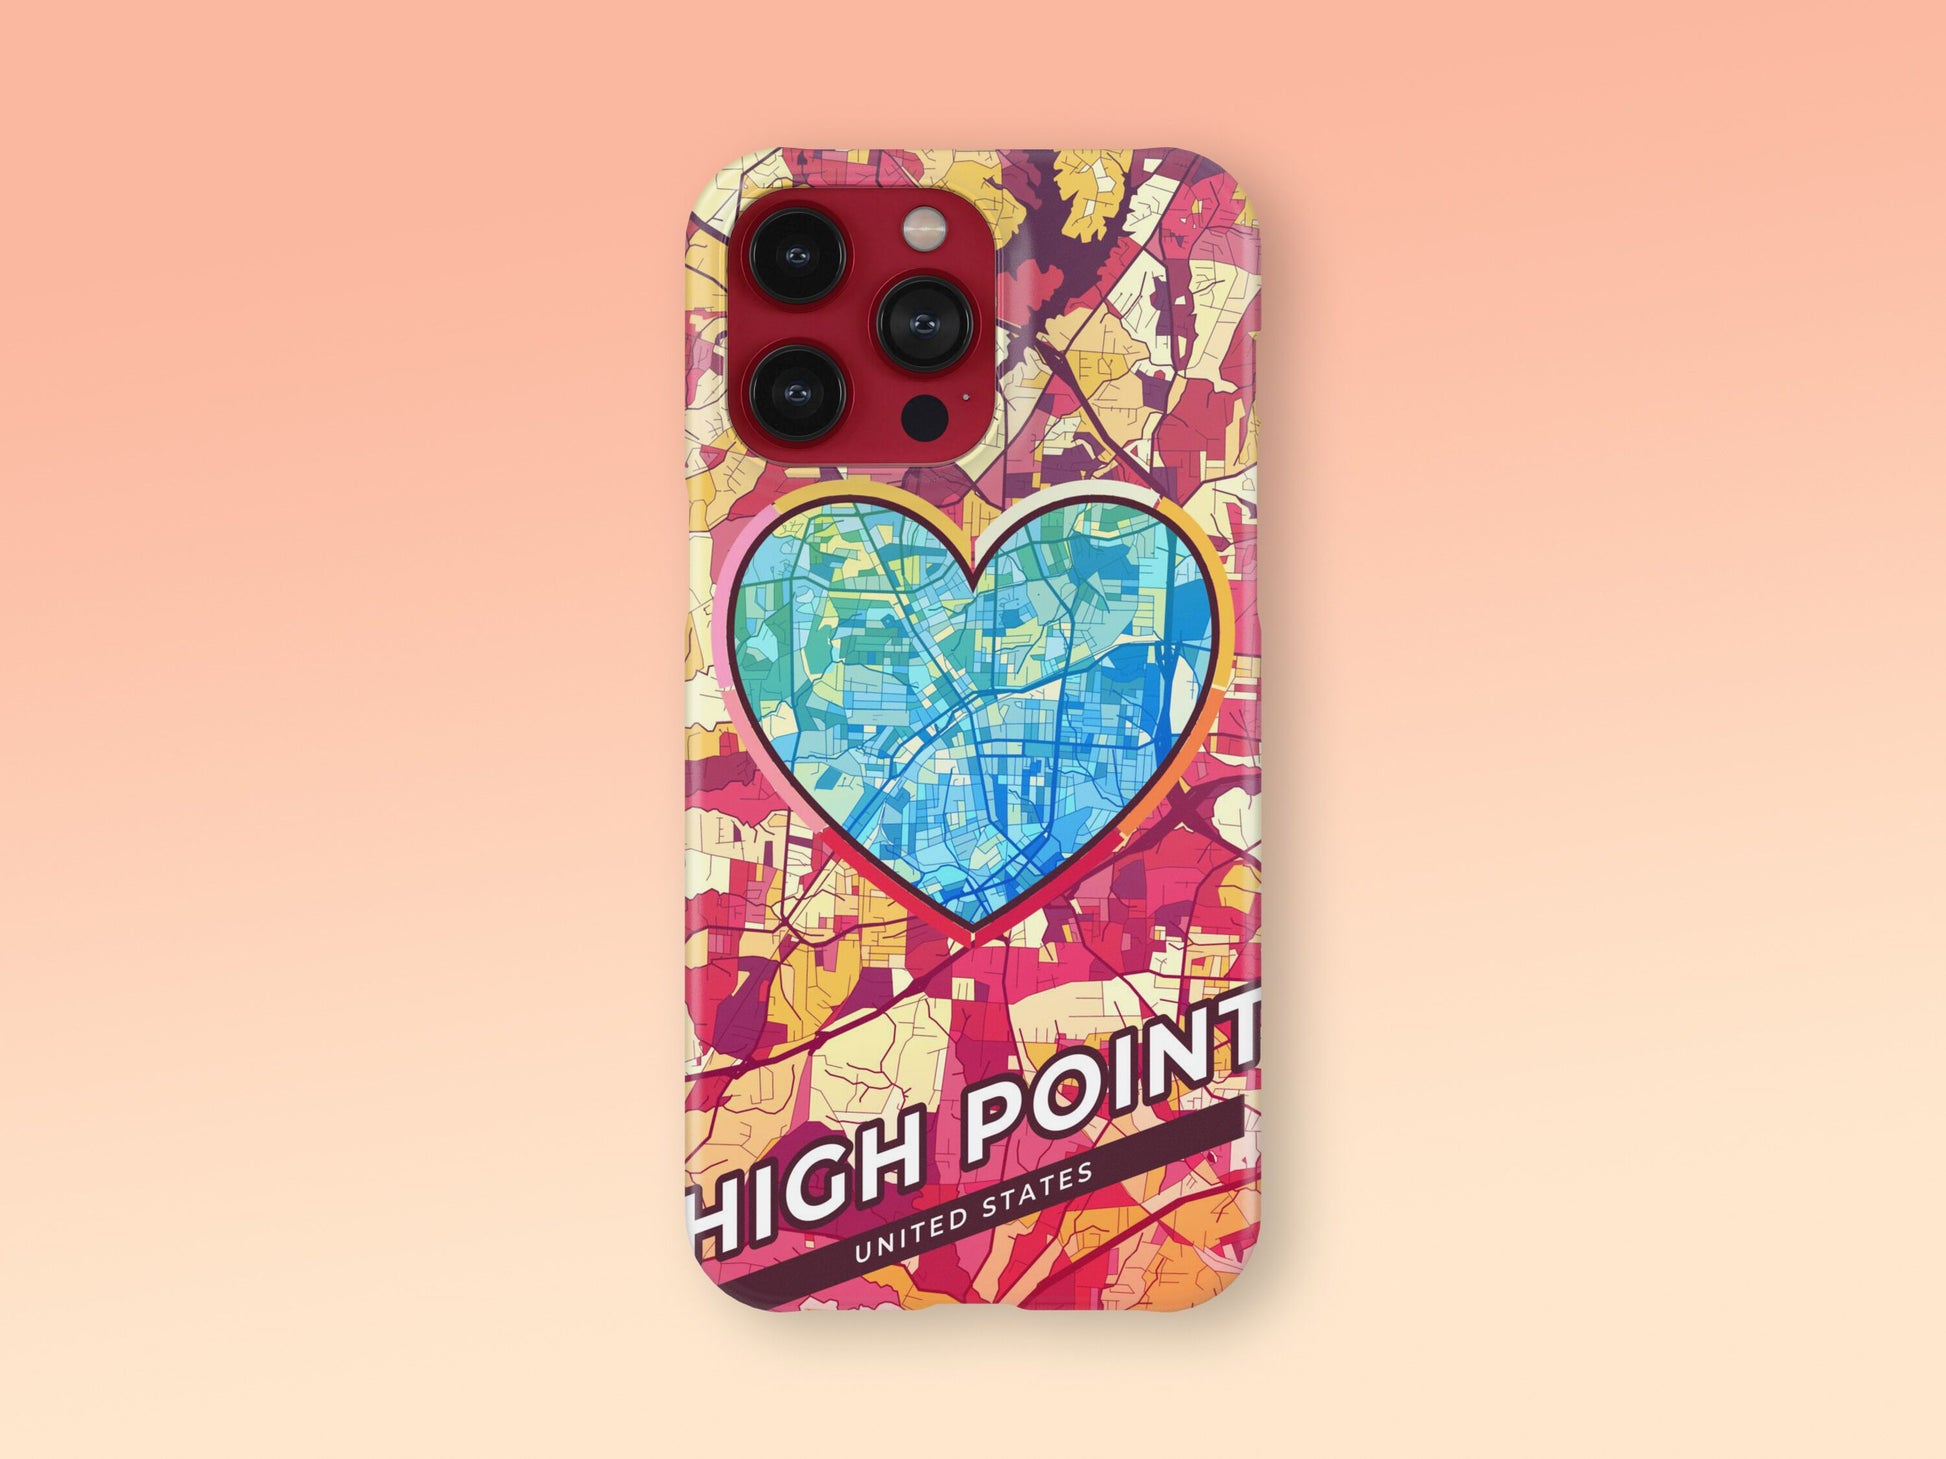 High Point North Carolina slim phone case with colorful icon. Birthday, wedding or housewarming gift. Couple match cases. 2